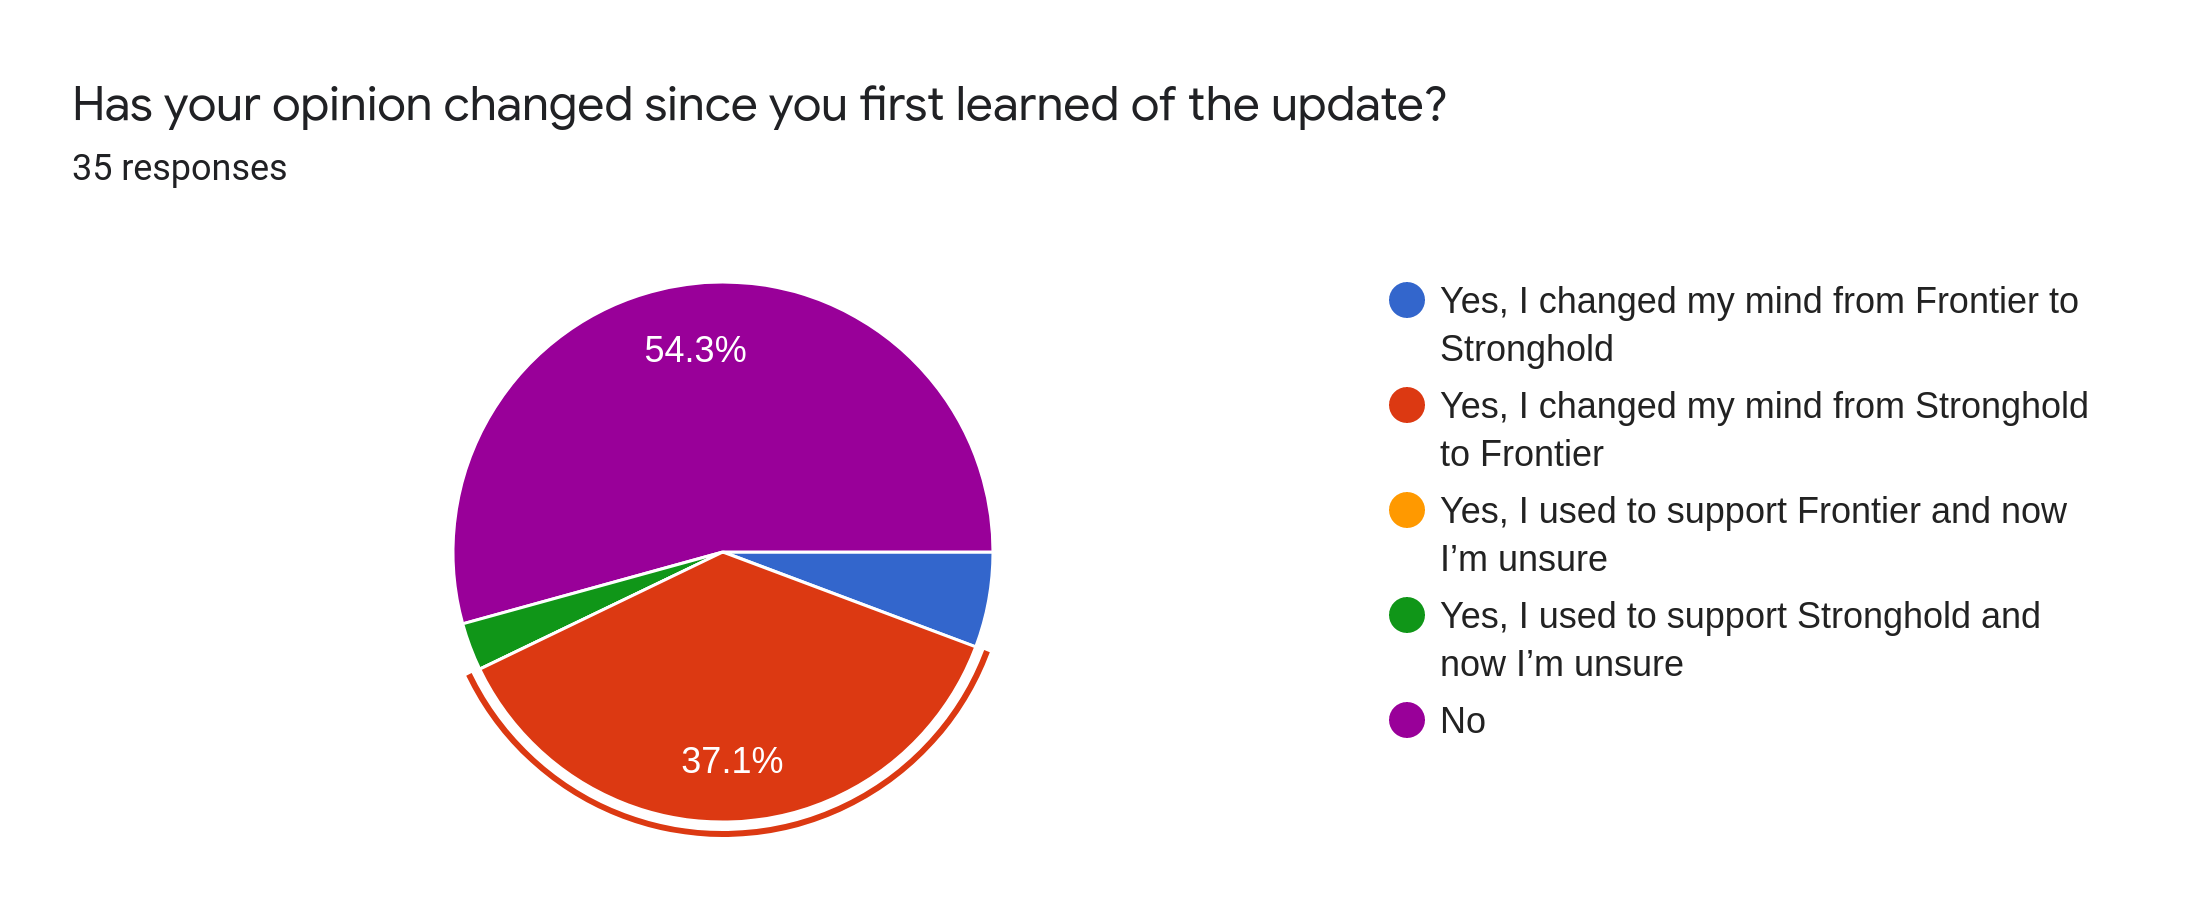 Forms response chart. Question title: Has your opinion changed since you first learned of the update?. Number of responses: 35 responses.